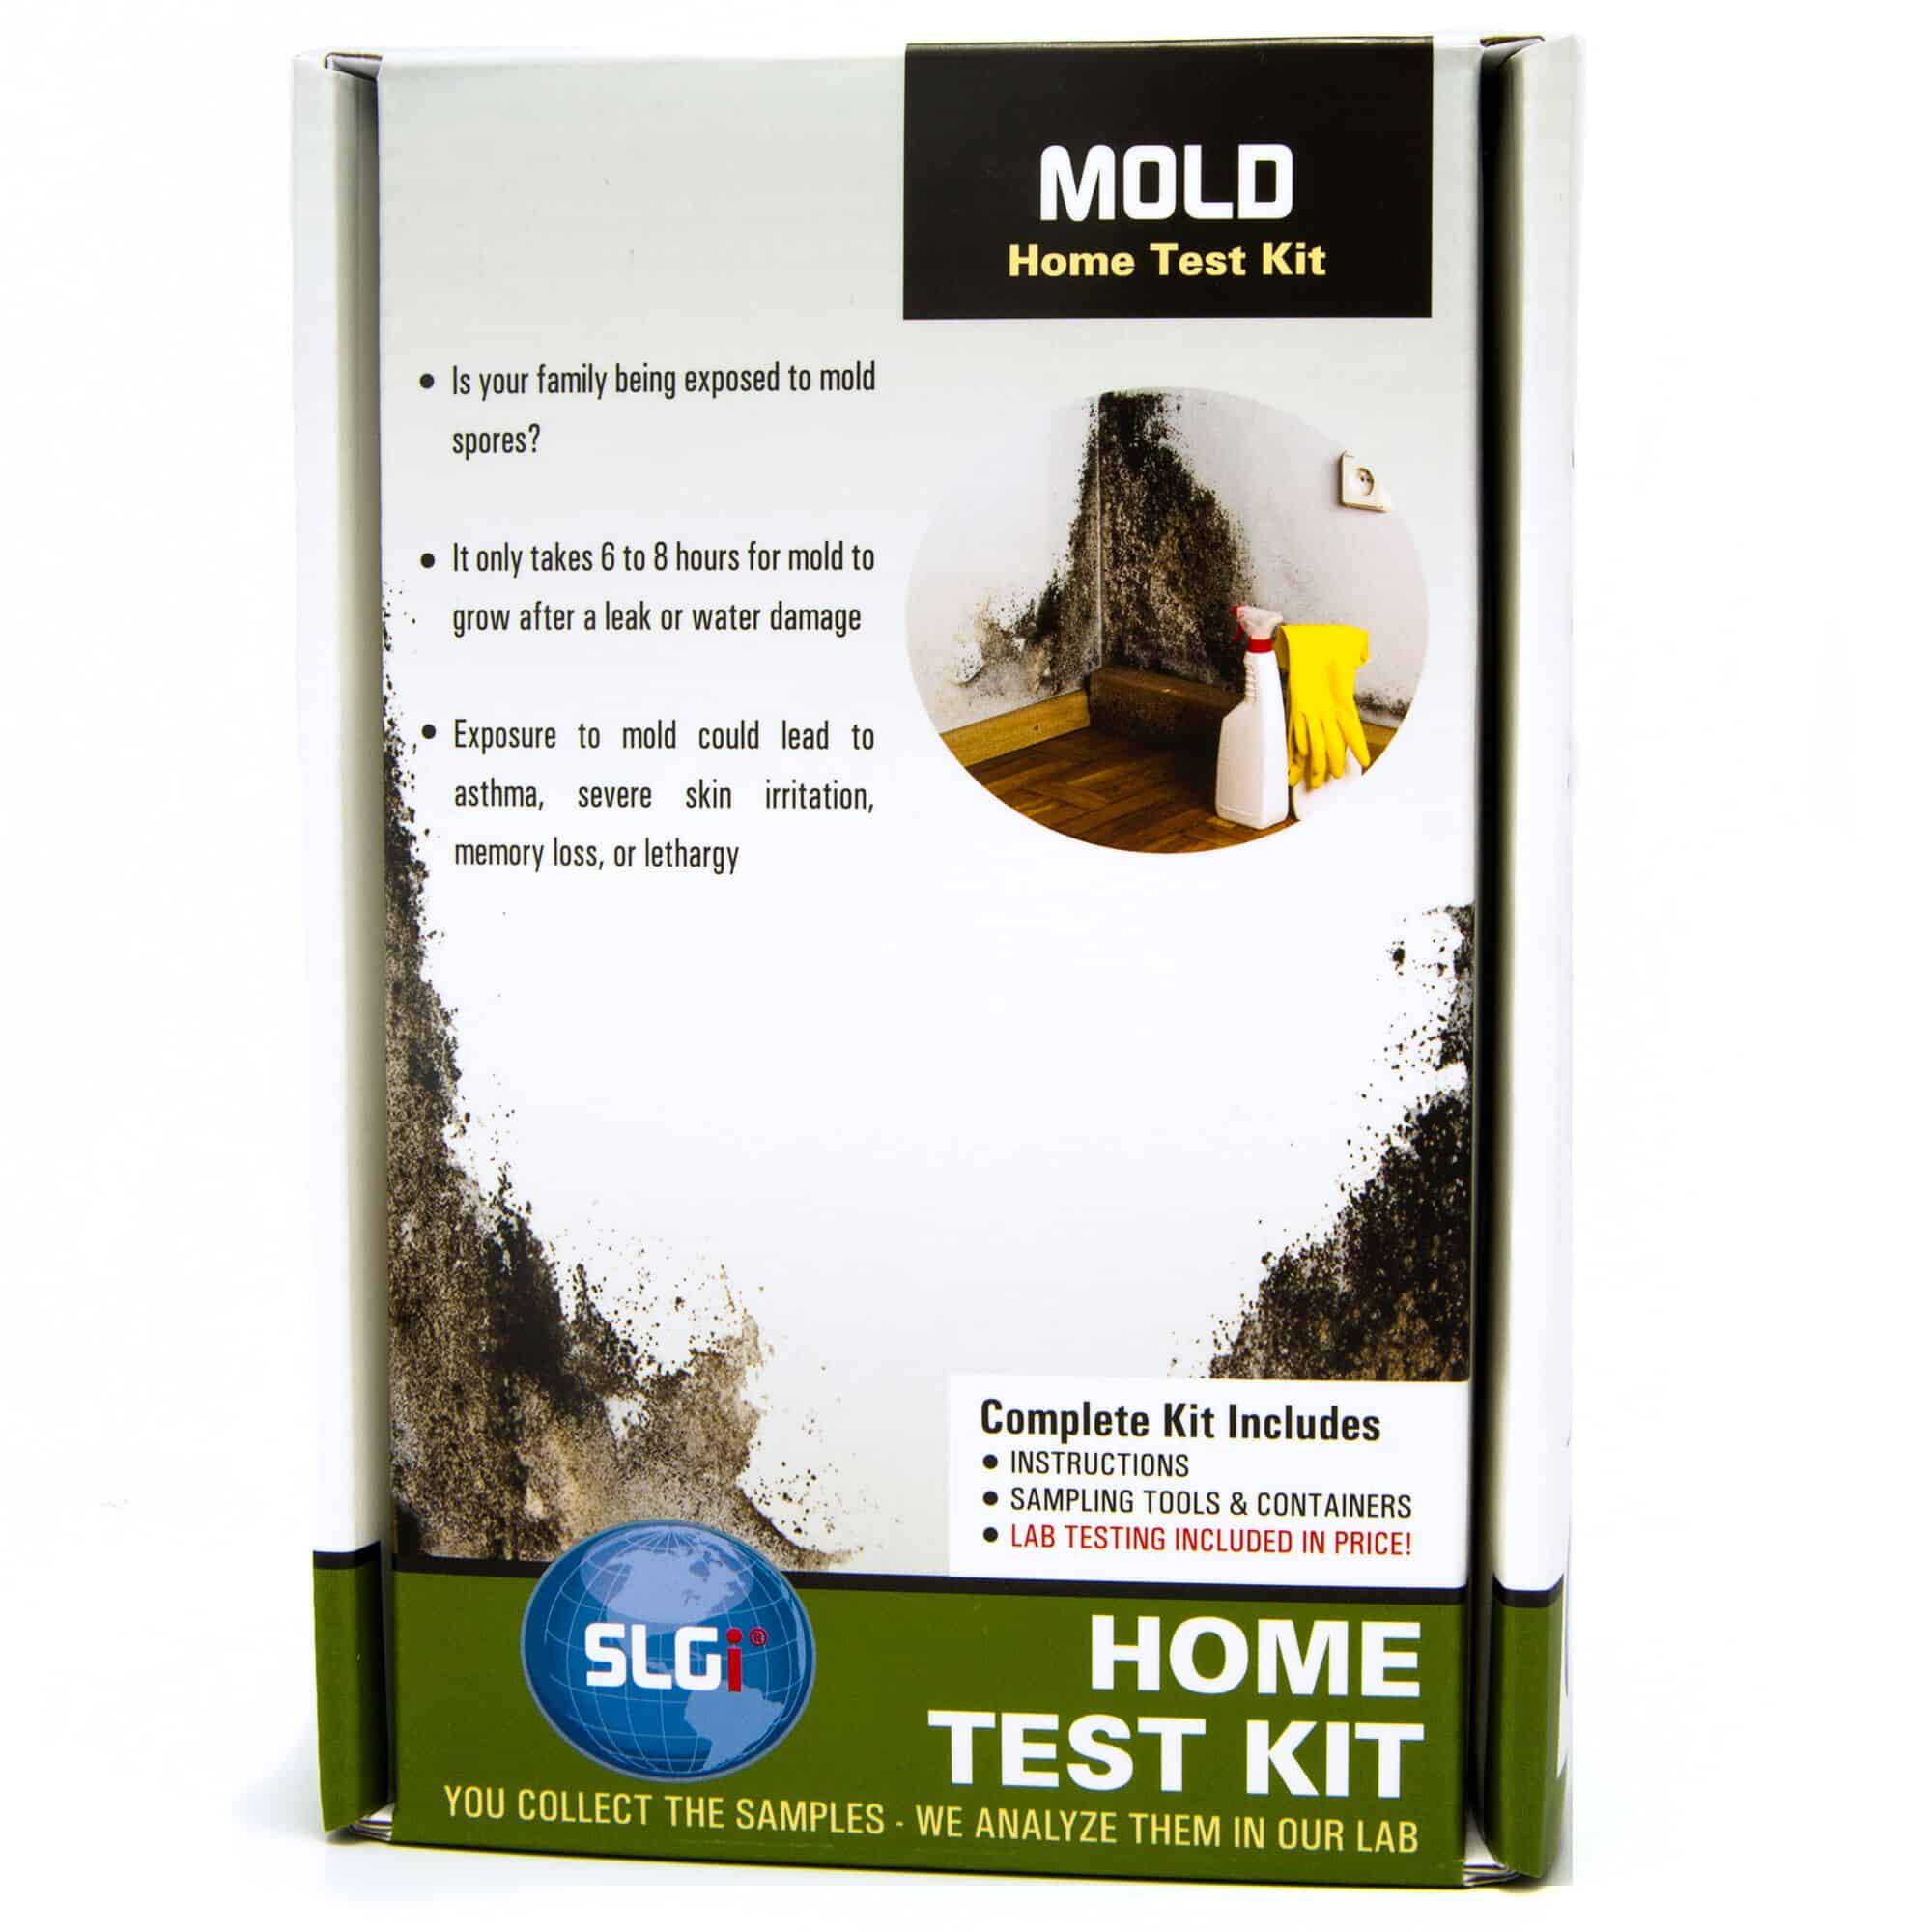 6 Best Mold Test Kits for at Home Testing